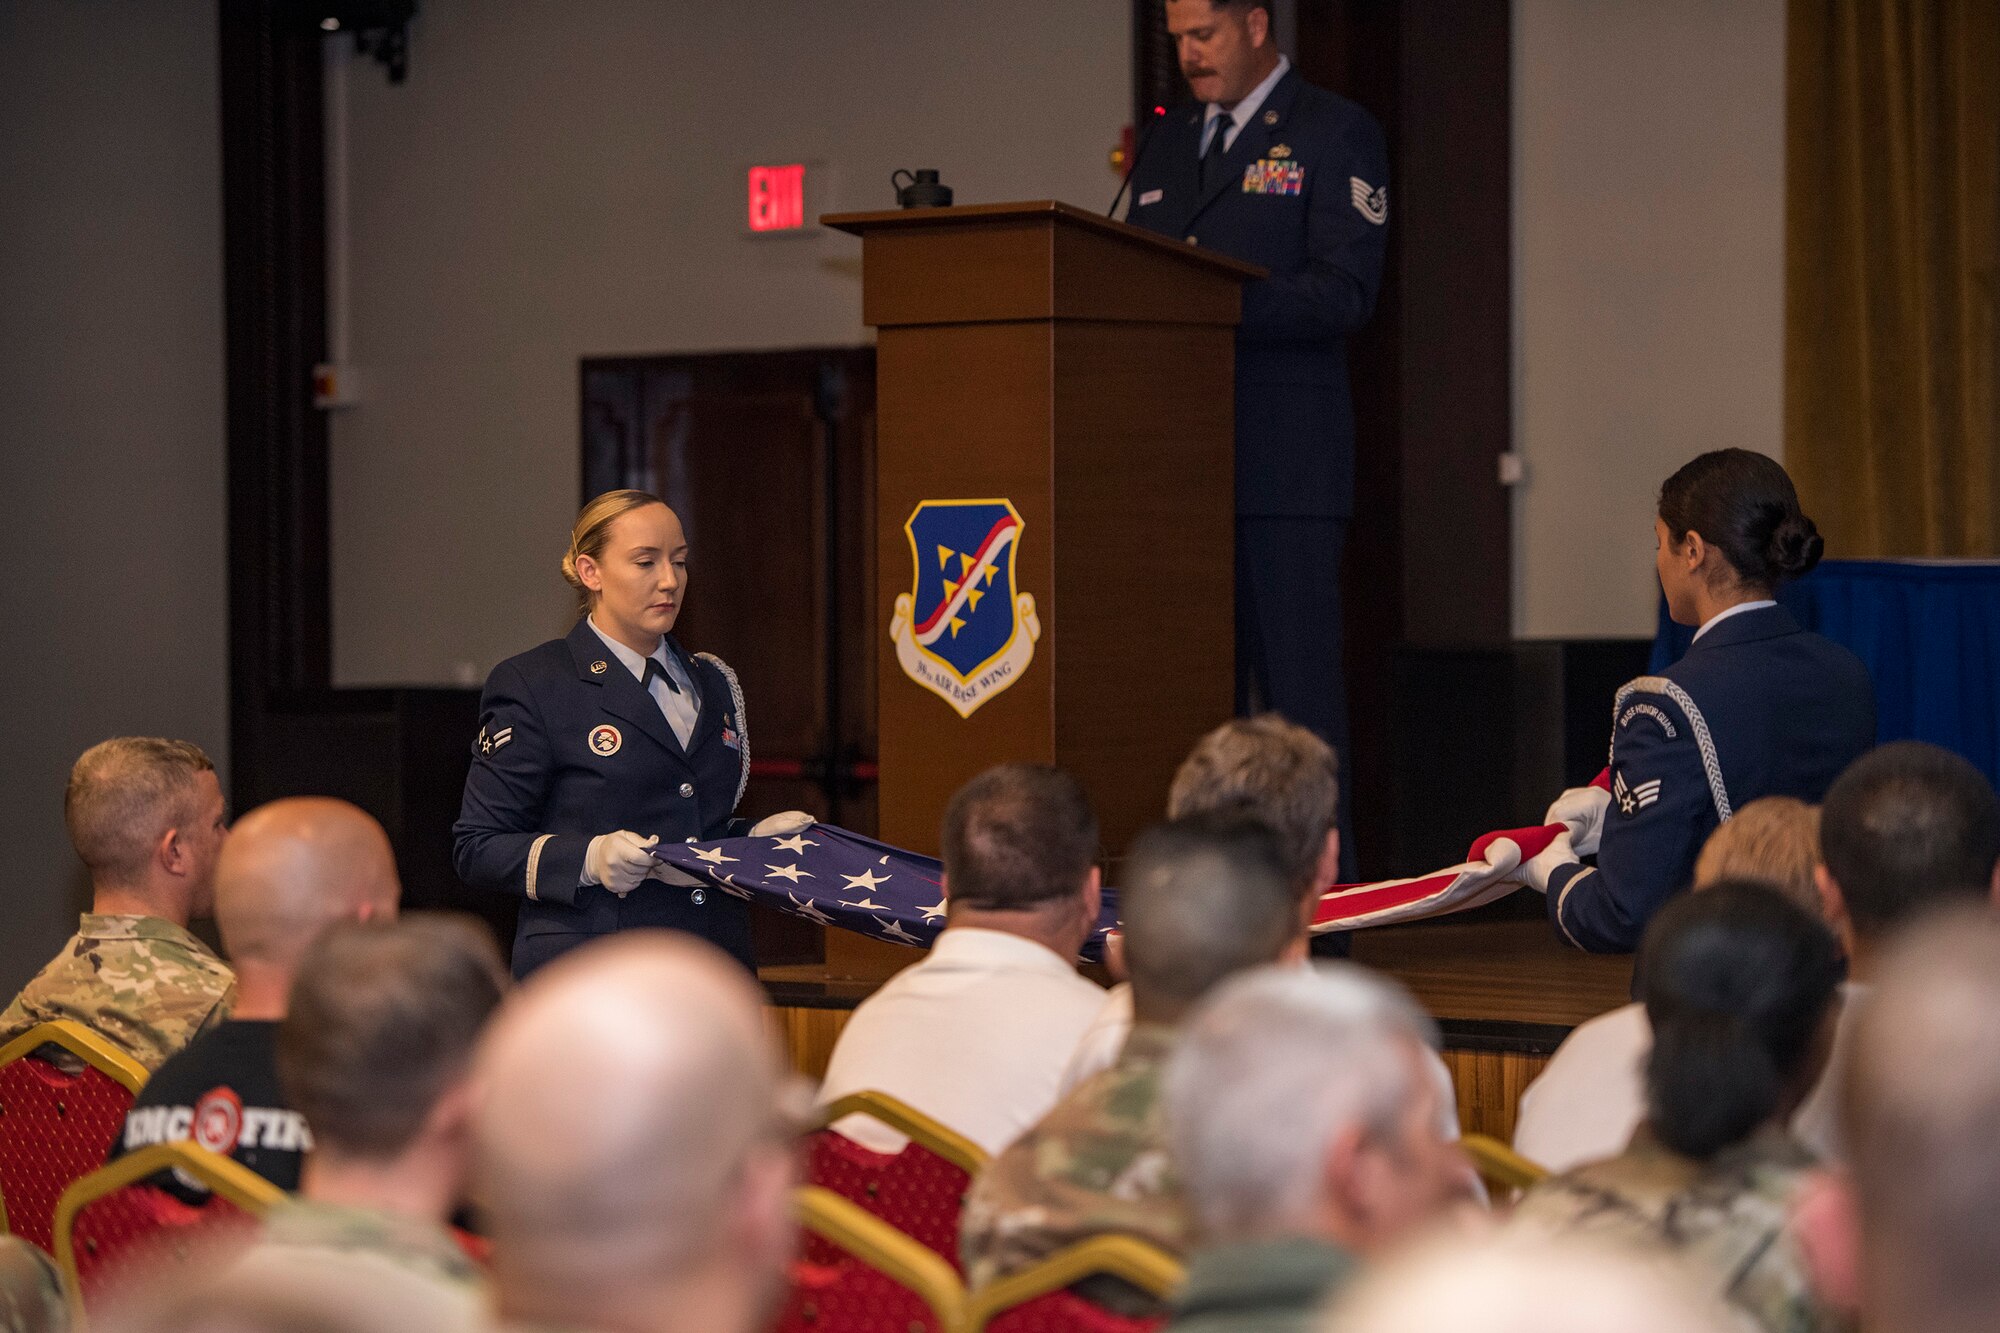 Members of the 39th Air Base Wing Honor Guard perform a ceremonial flag fold during a 9/11 remembrance ceremony Sept. 11, 2019, at Incirlik Air Base, Turkey. Honor Guardsmen ceremonially folded the flag 13 times to create the shape of a cocked hat in honor of the lives lost during the 9/11 terrorists attacks. (U.S. Air Force photo by Staff Sgt. Ceaira Tinsley)